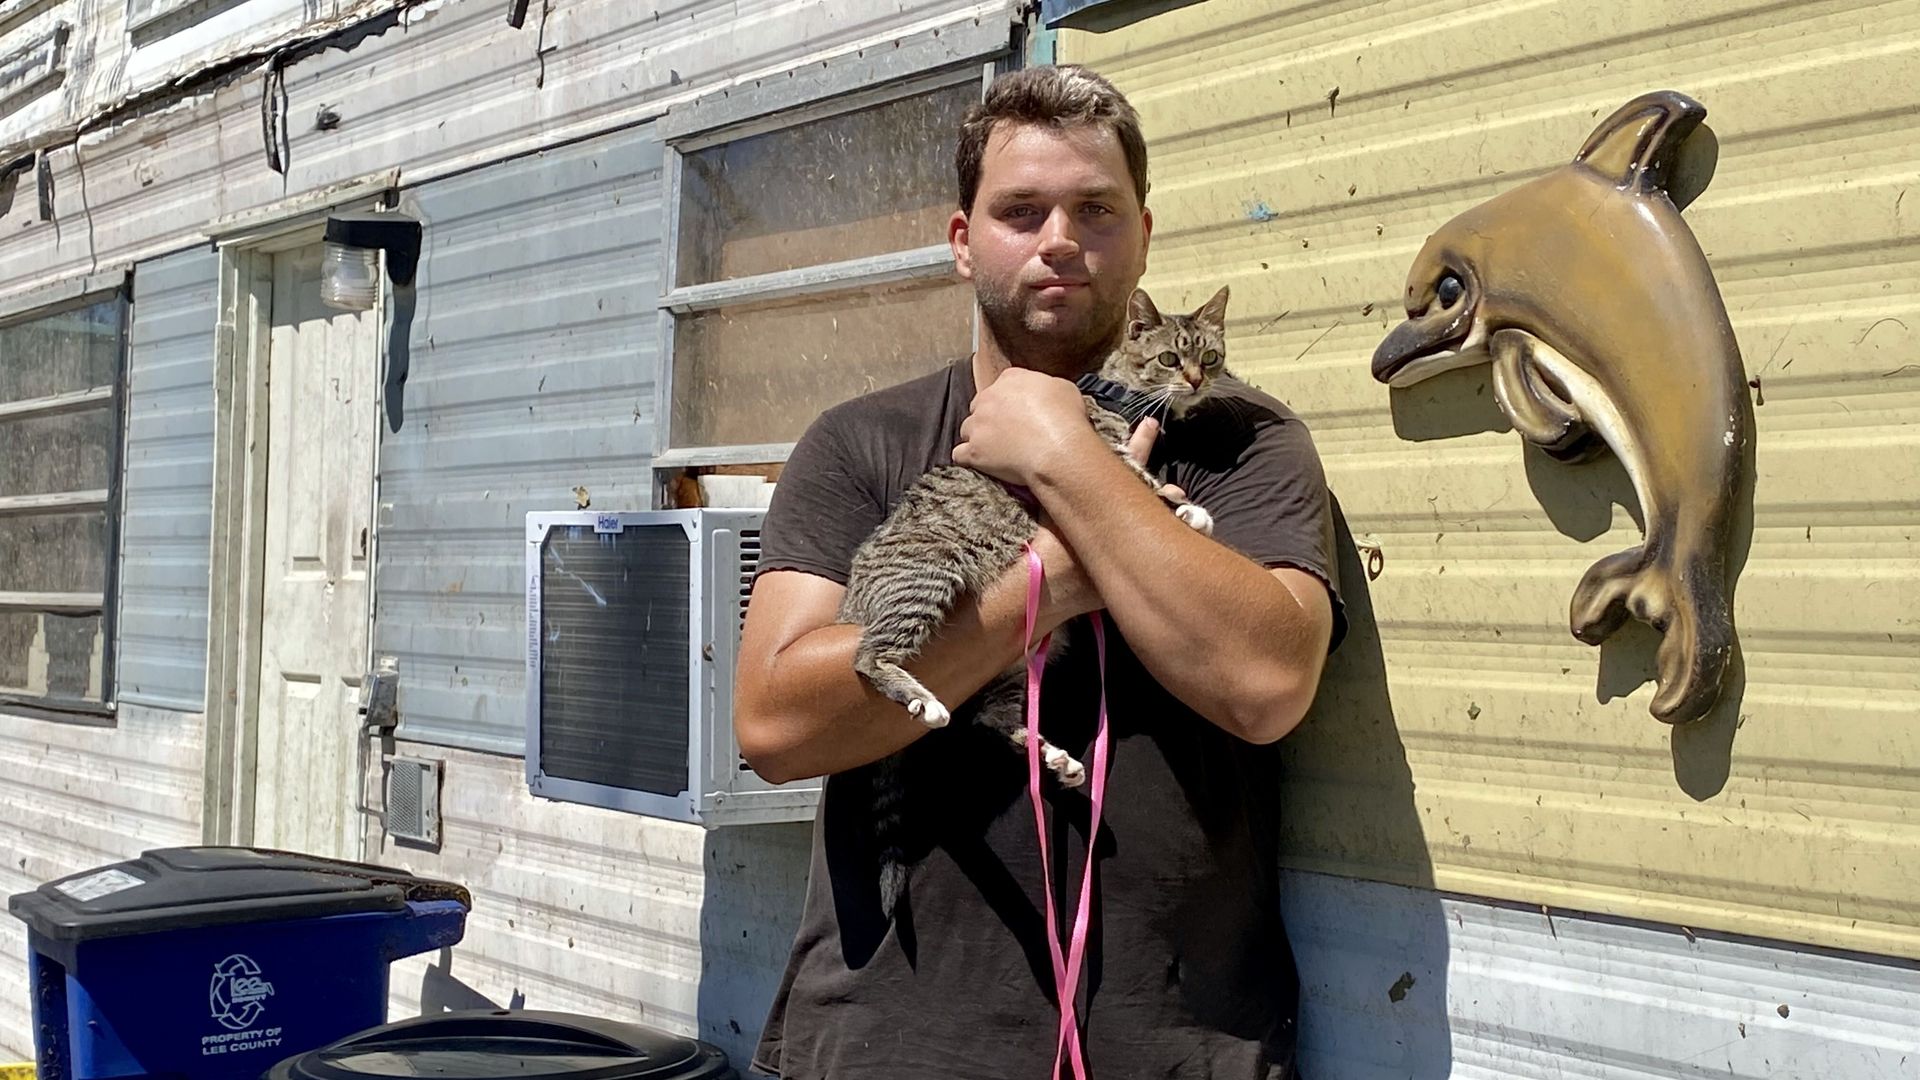 Anthony Lehman poses in front of his mobile home while holding his tabby cat Rocky.